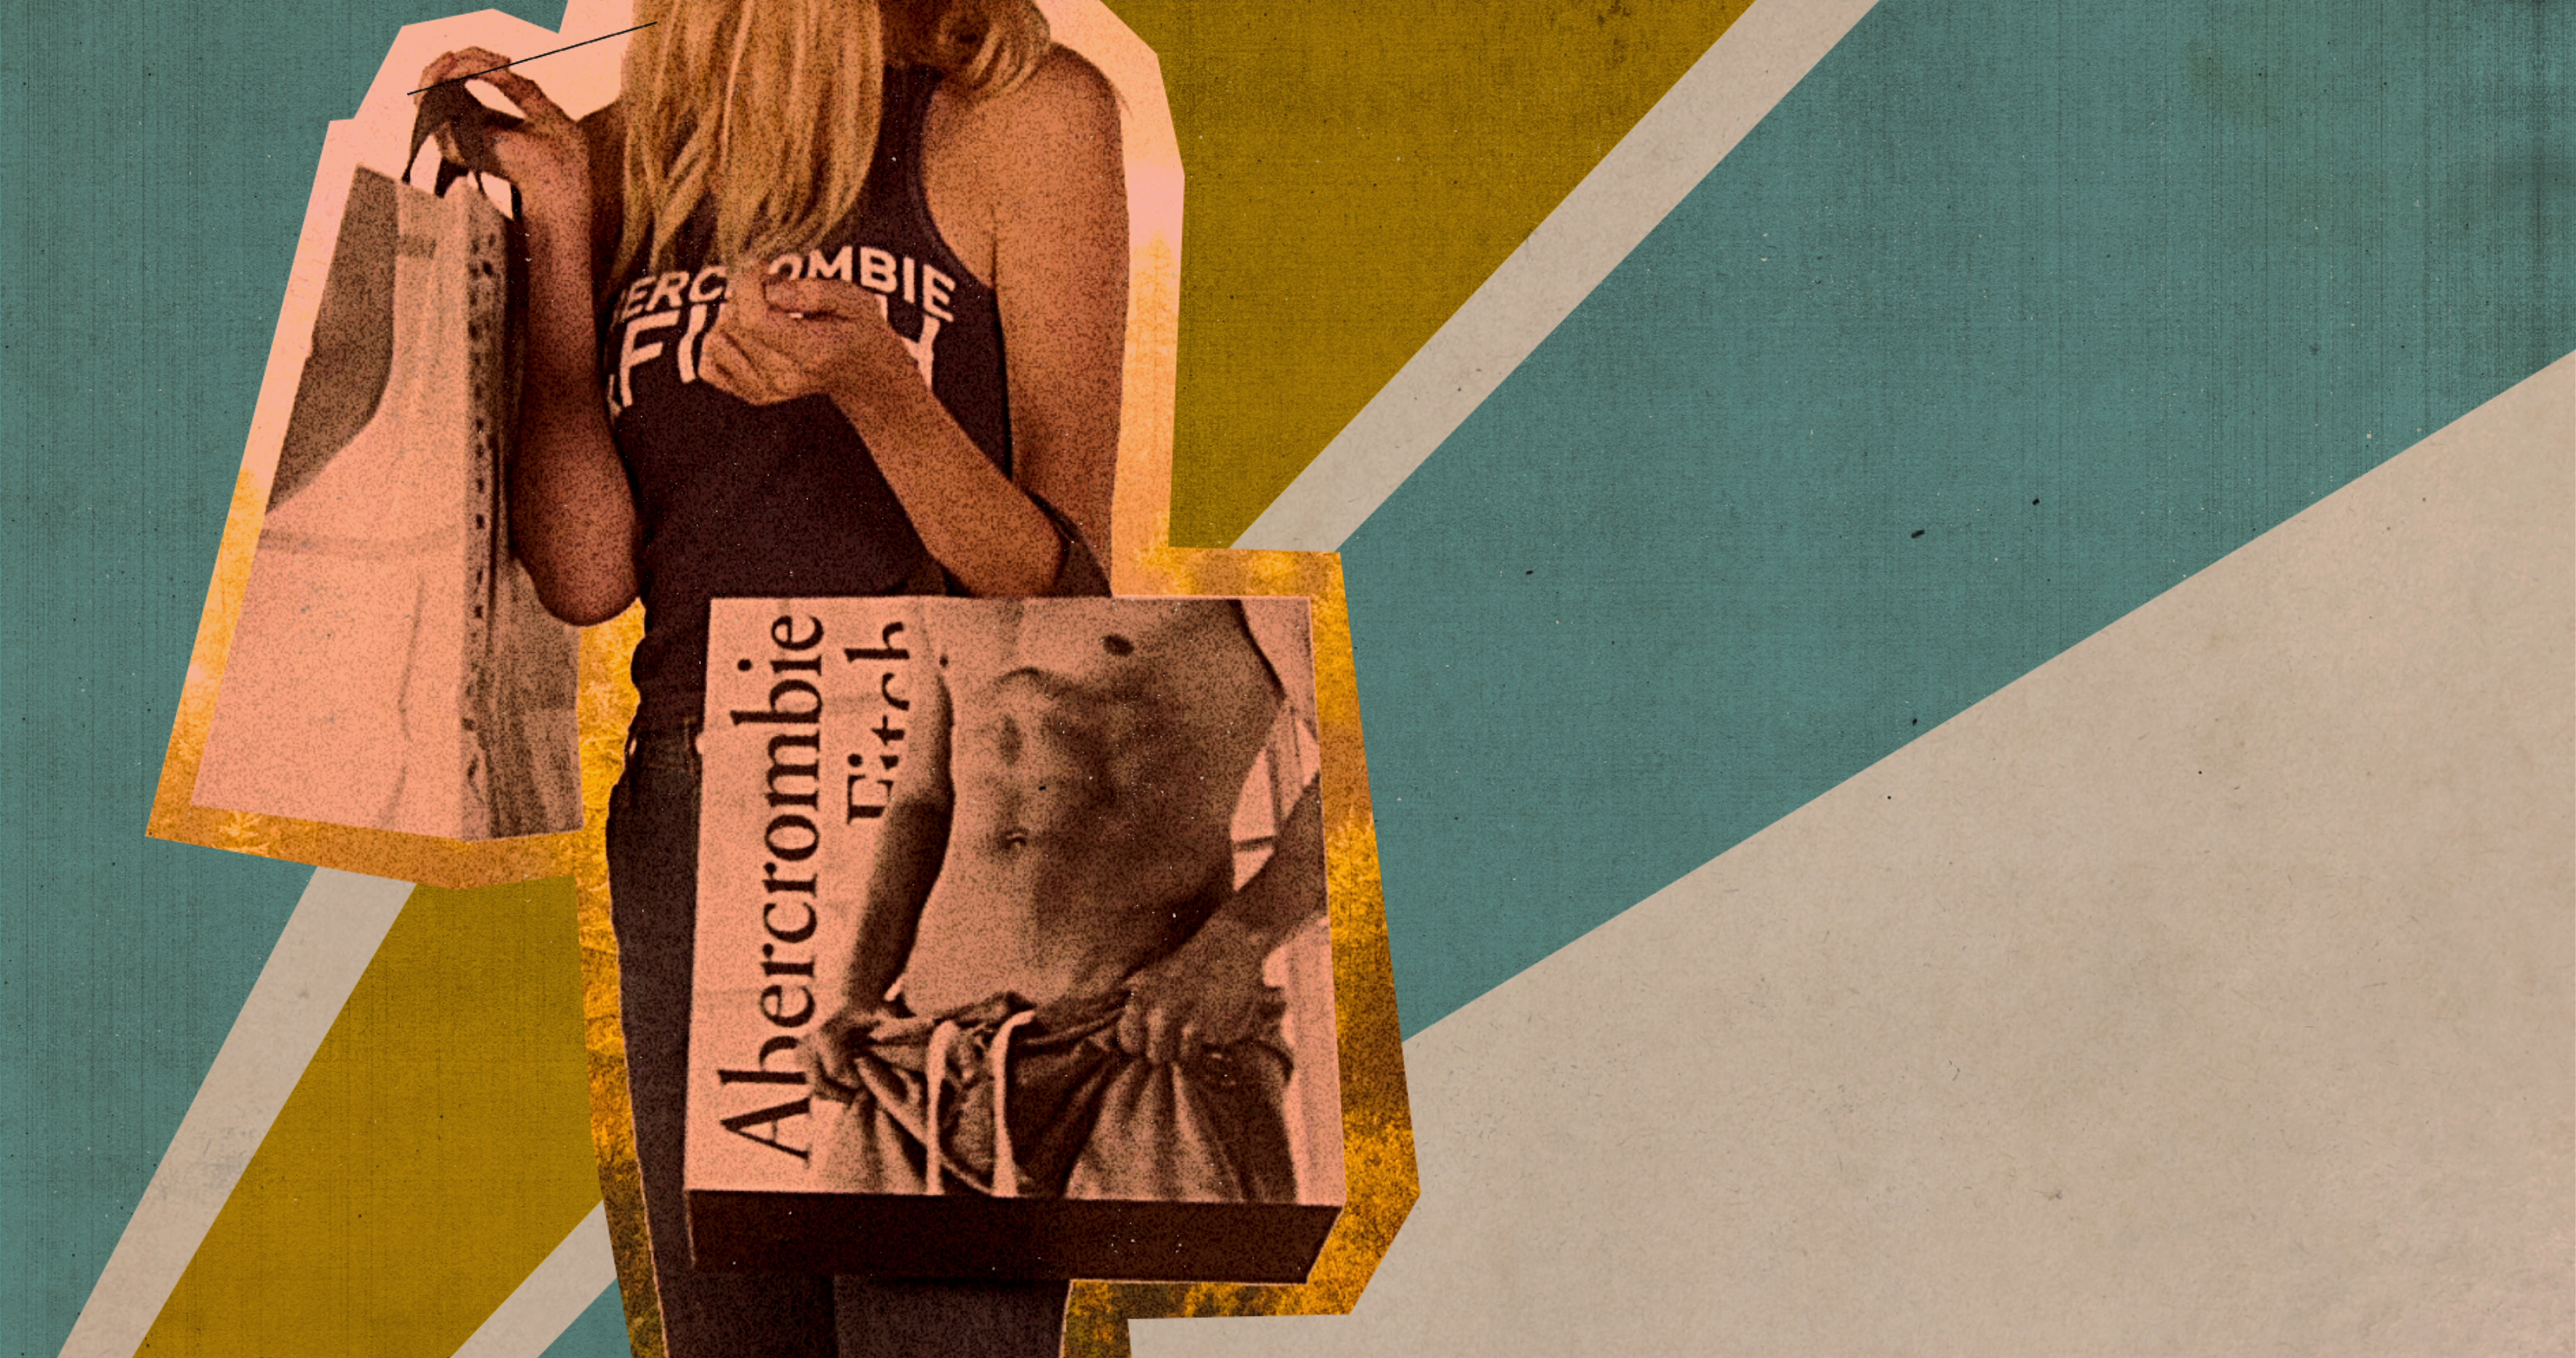 A collage image featuring the torso of a young woman holding an Abercrombie &amp; Fitch bag with an image of a young man’s abs on it.